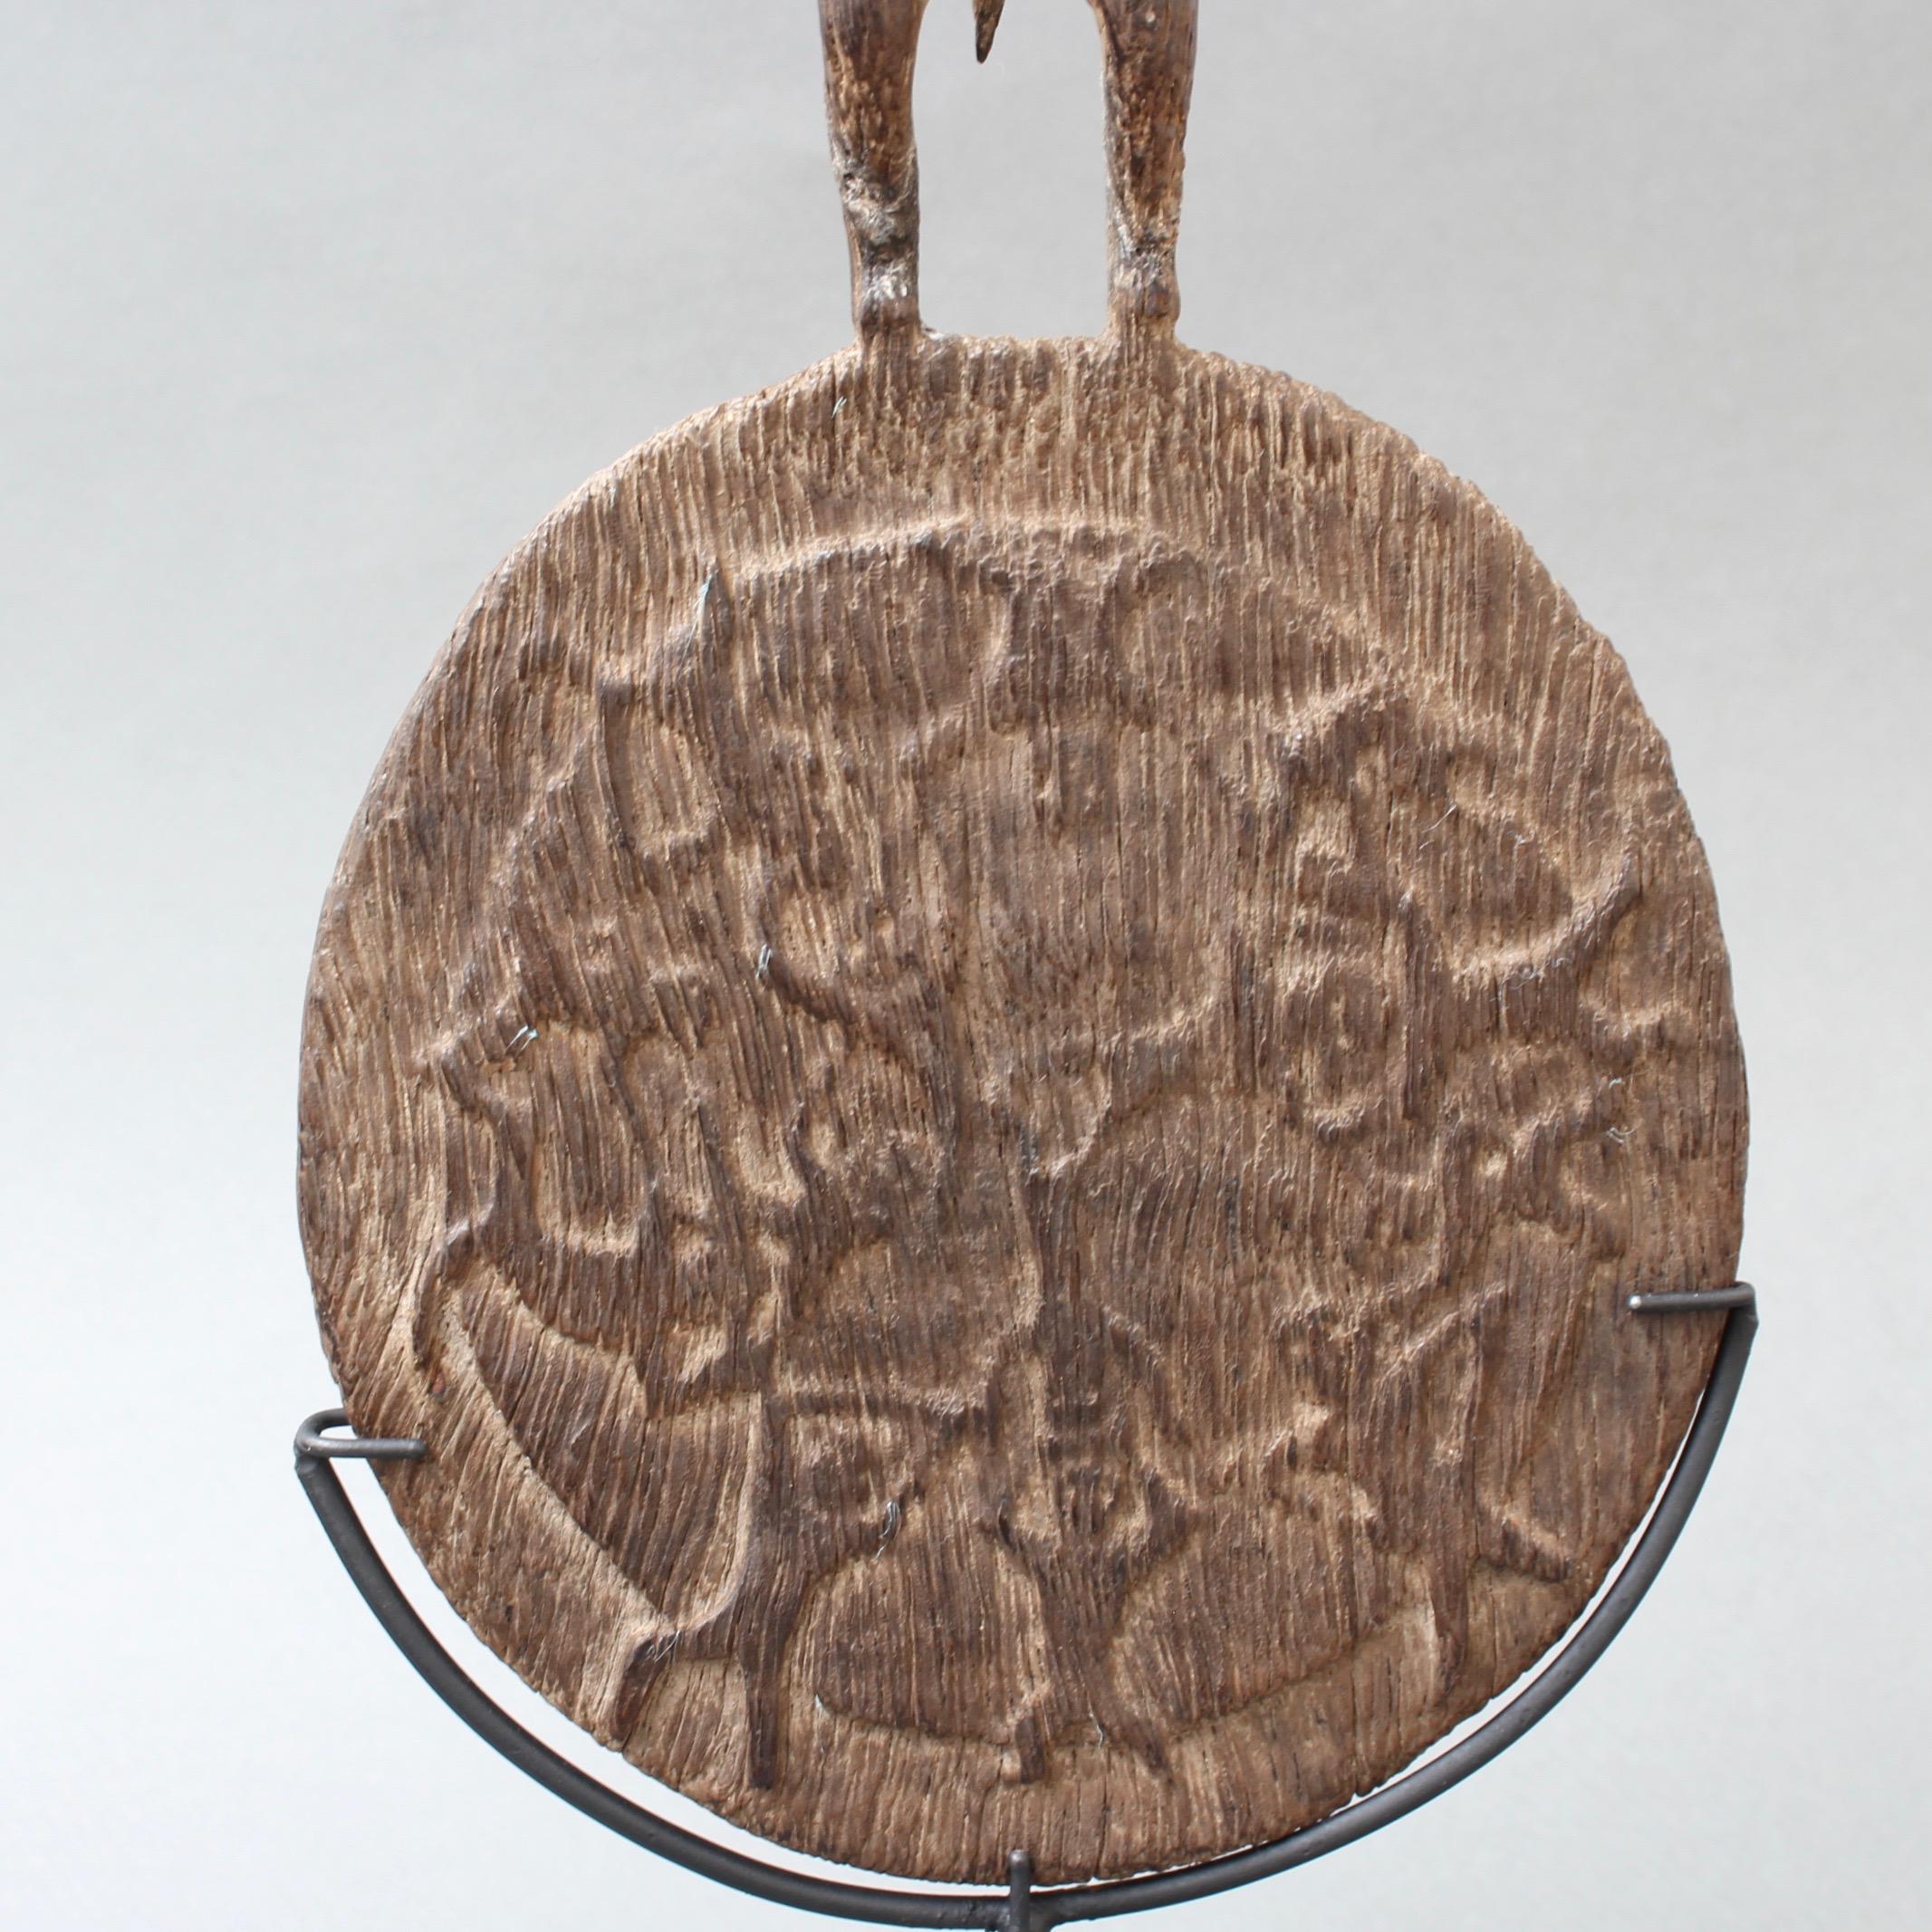 Early 20th Century Carved Wooden Ritual Calendar from Kalimantan 'Borneo' 2